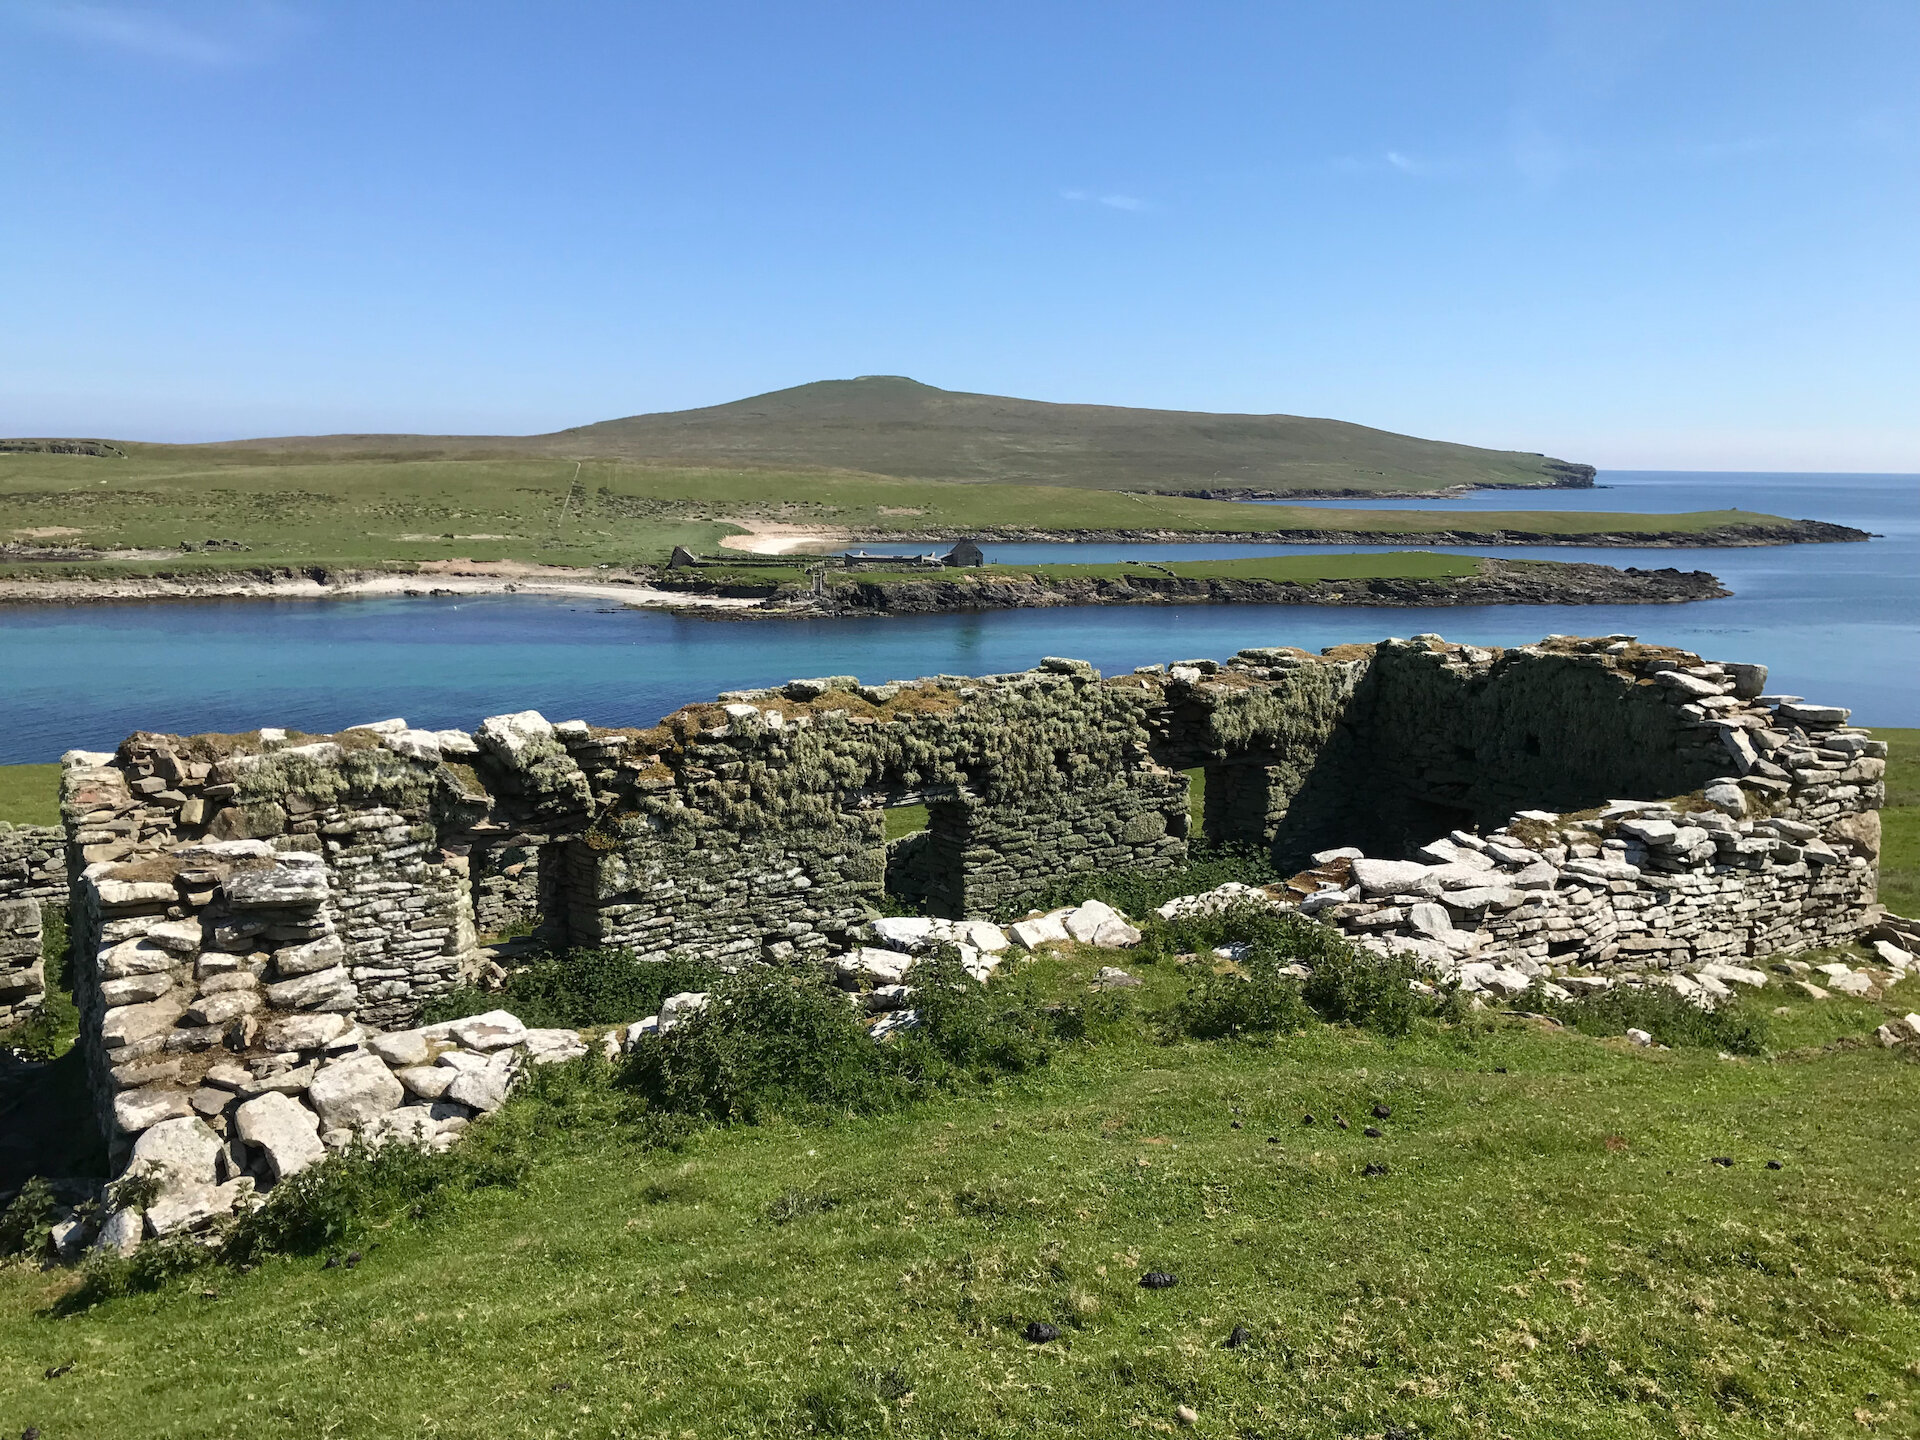 What's left of Northerhouse, also known as 'The Ferryman's House', looking across to Noss and its national nature reserve. Photo: Chris Dyer.